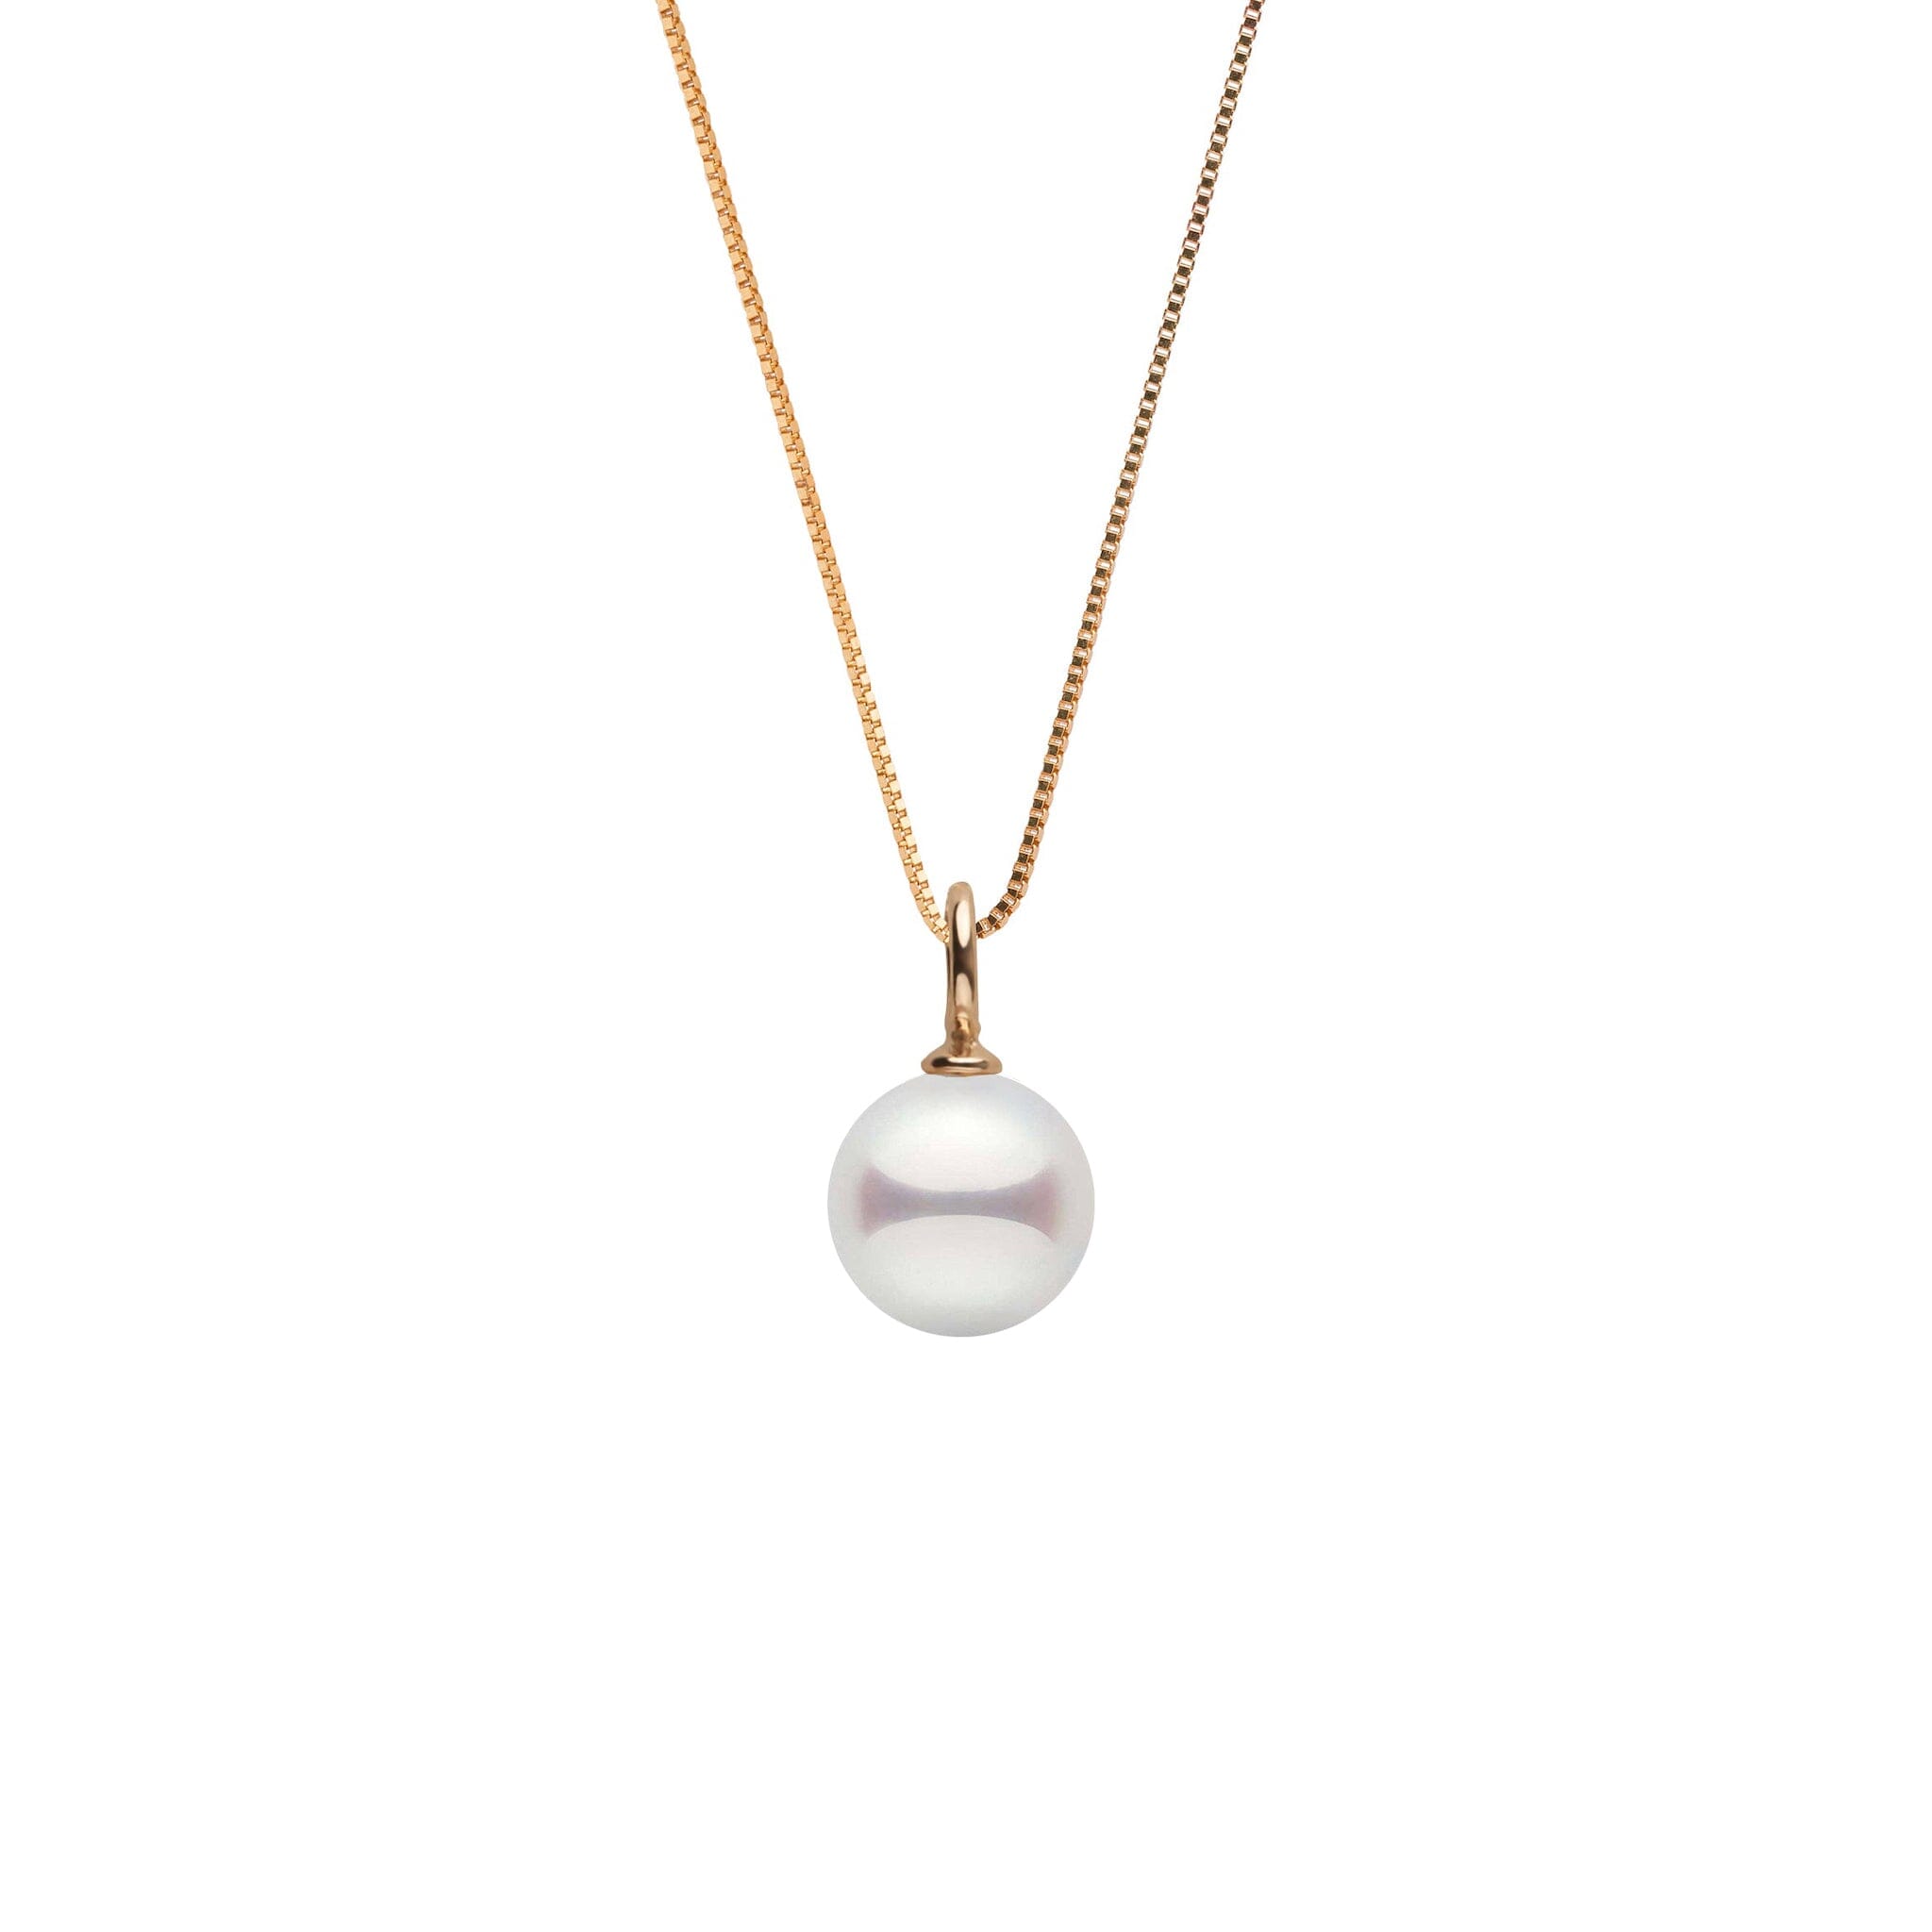 8.5-9.0 mm Akoya Pearl Muse Collection Pendant